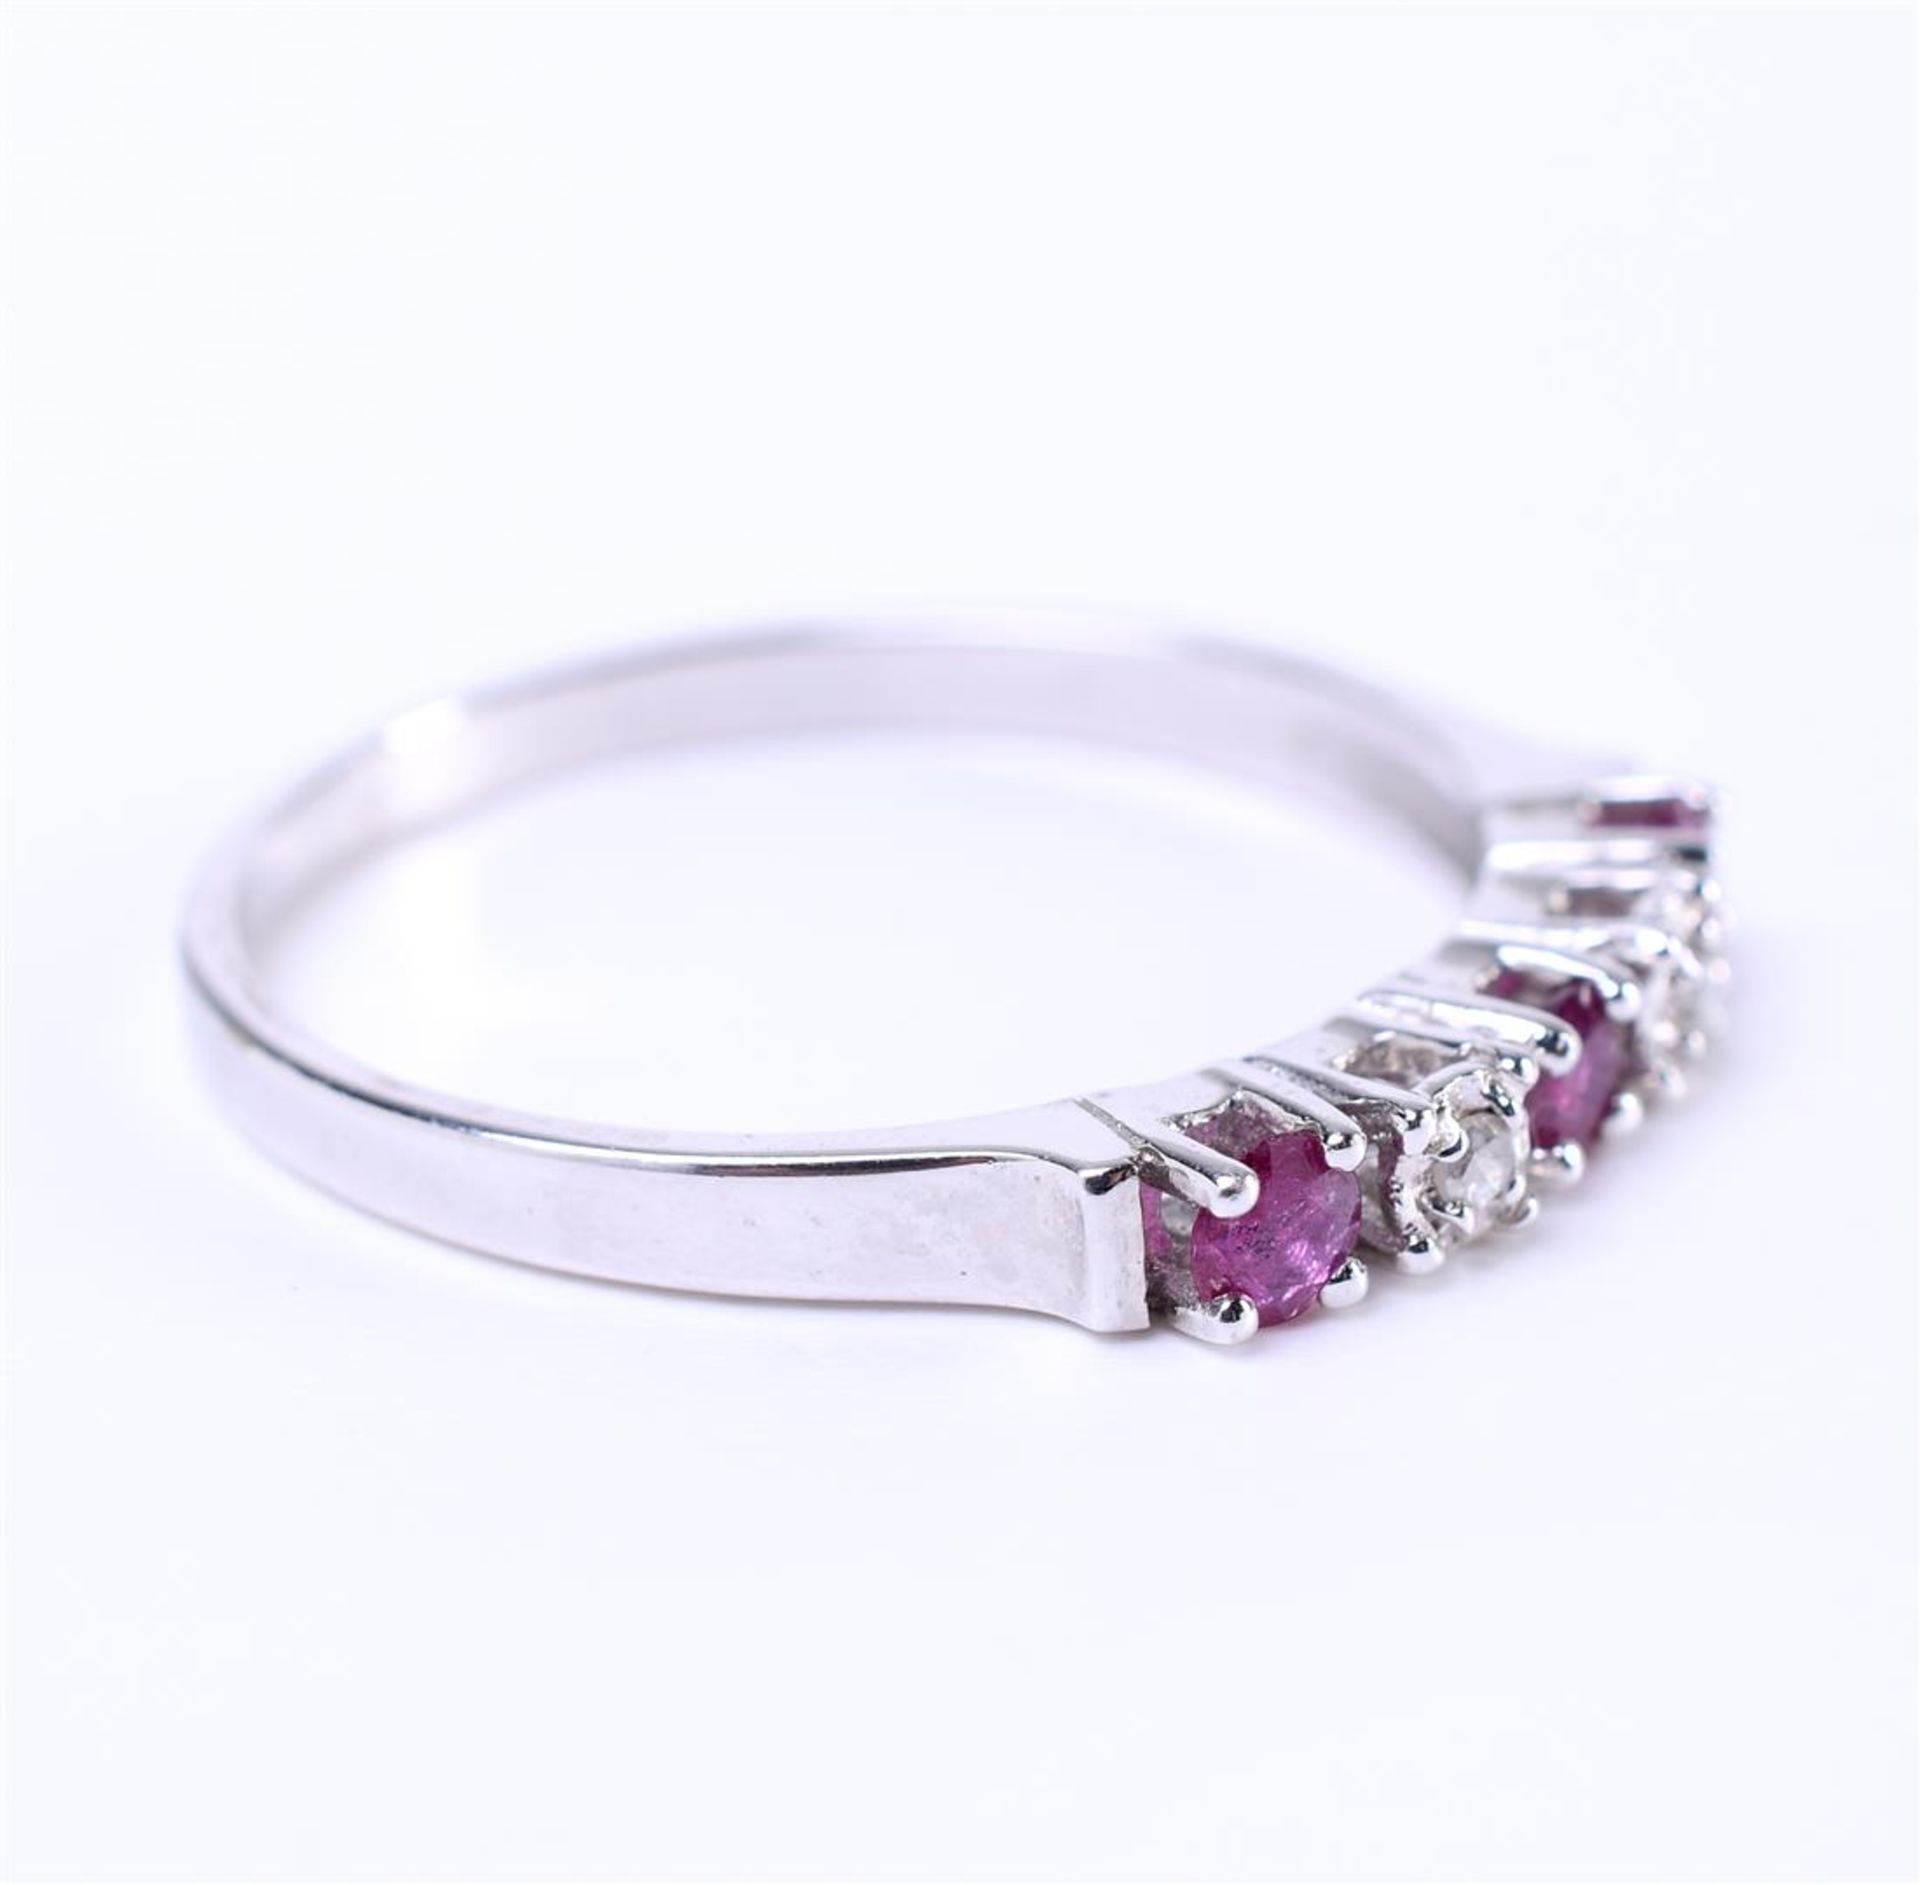 14kt white gold row ring set with ruby and diamond. Of which 2 single cut diamonds - Image 5 of 6